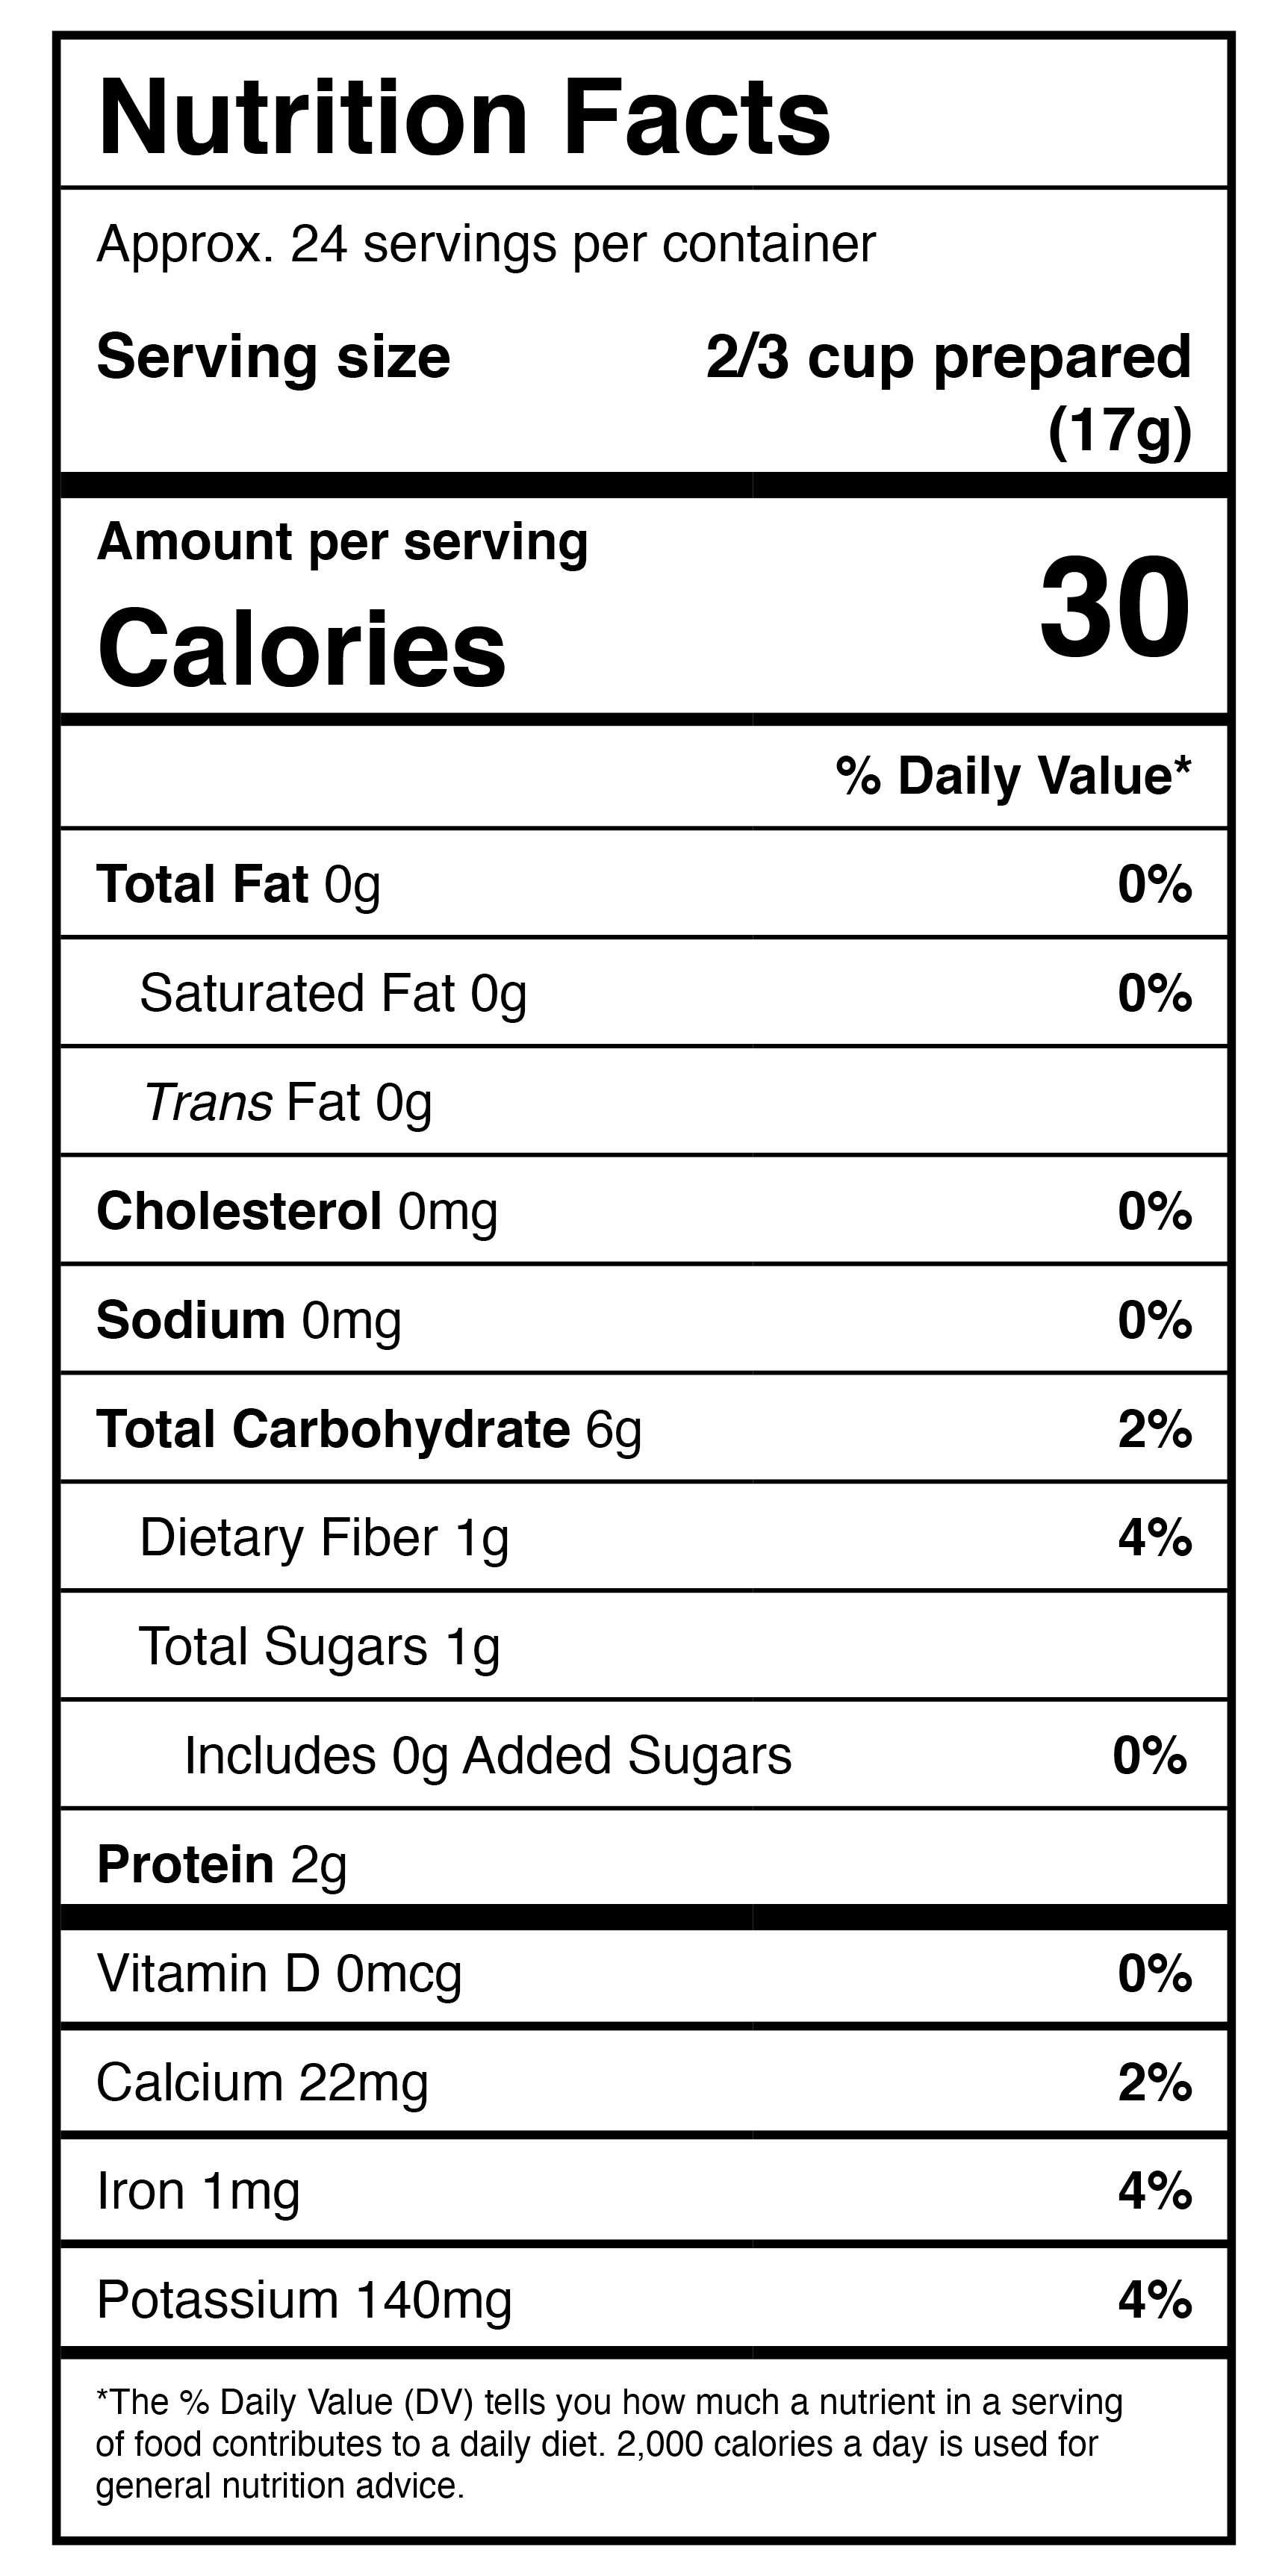 A nutrition label for a protein shake.